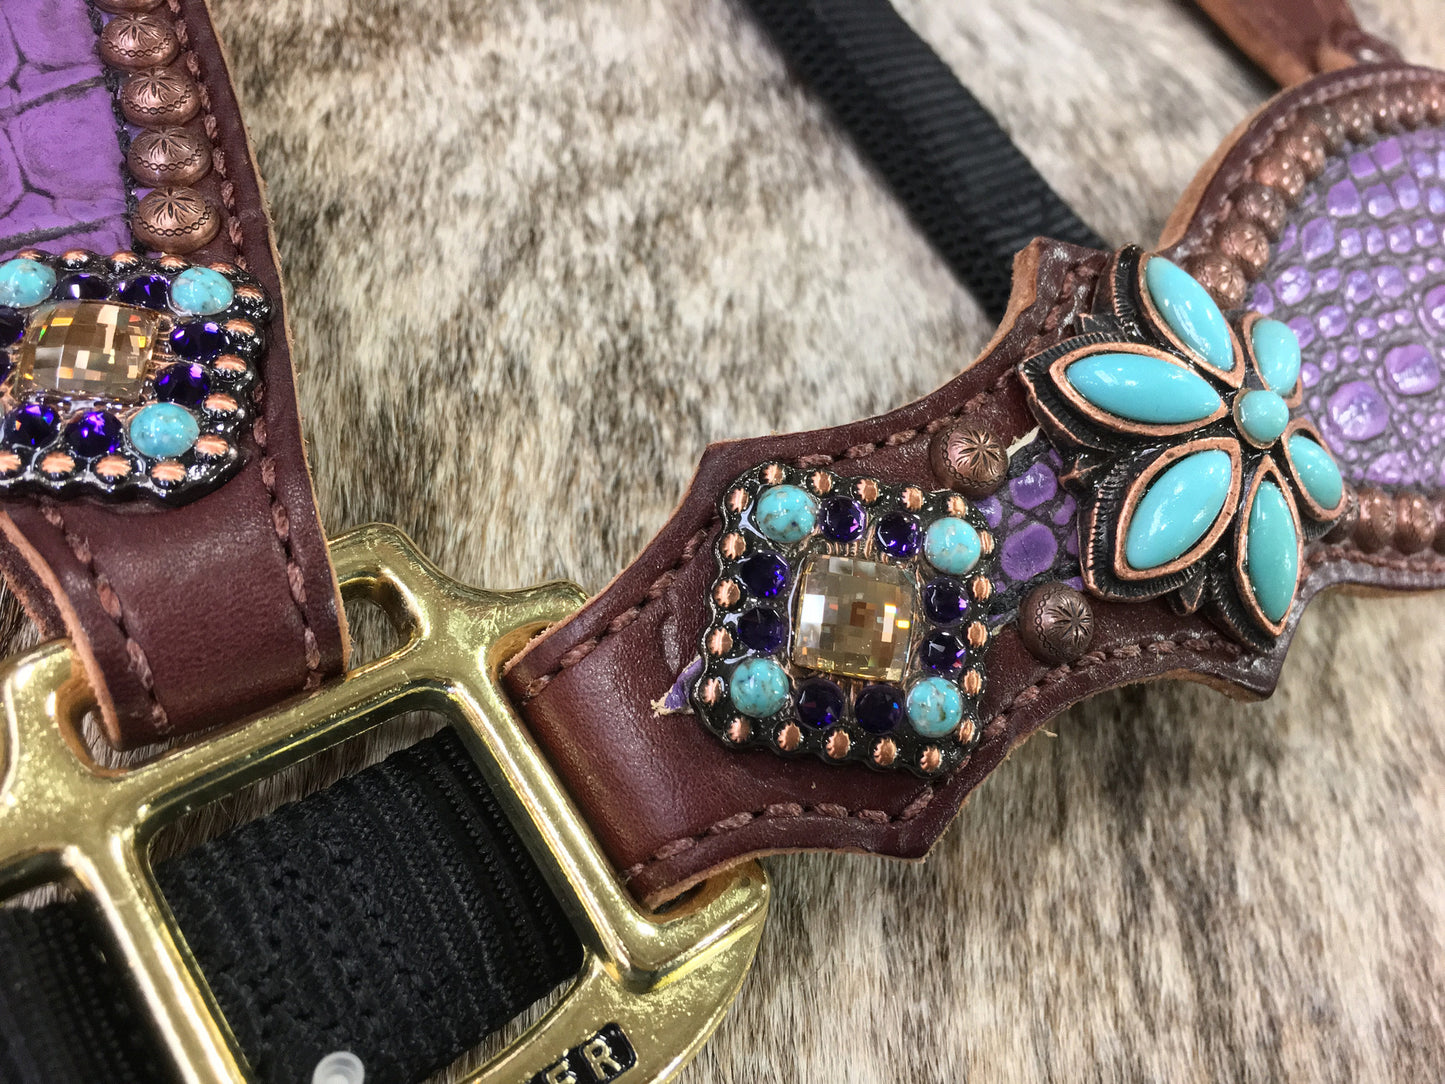 Purple gator halter with turquoise floral conchos.